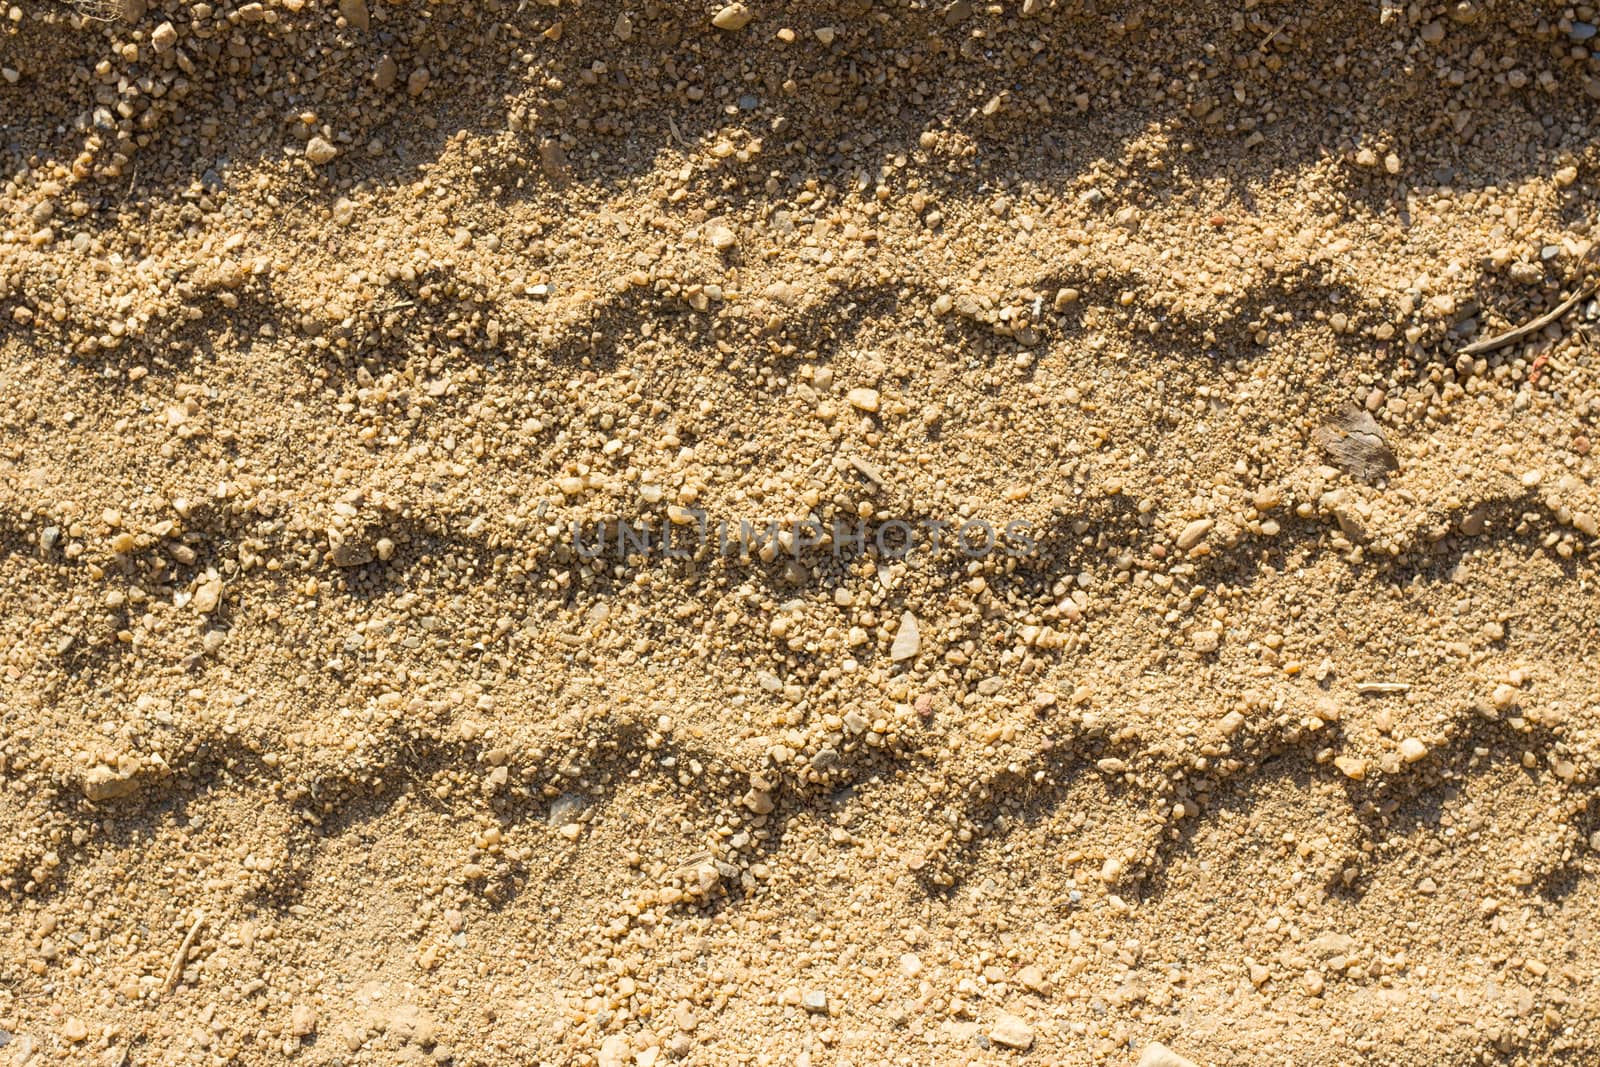 Car tire tracks on sand, as background by a3701027